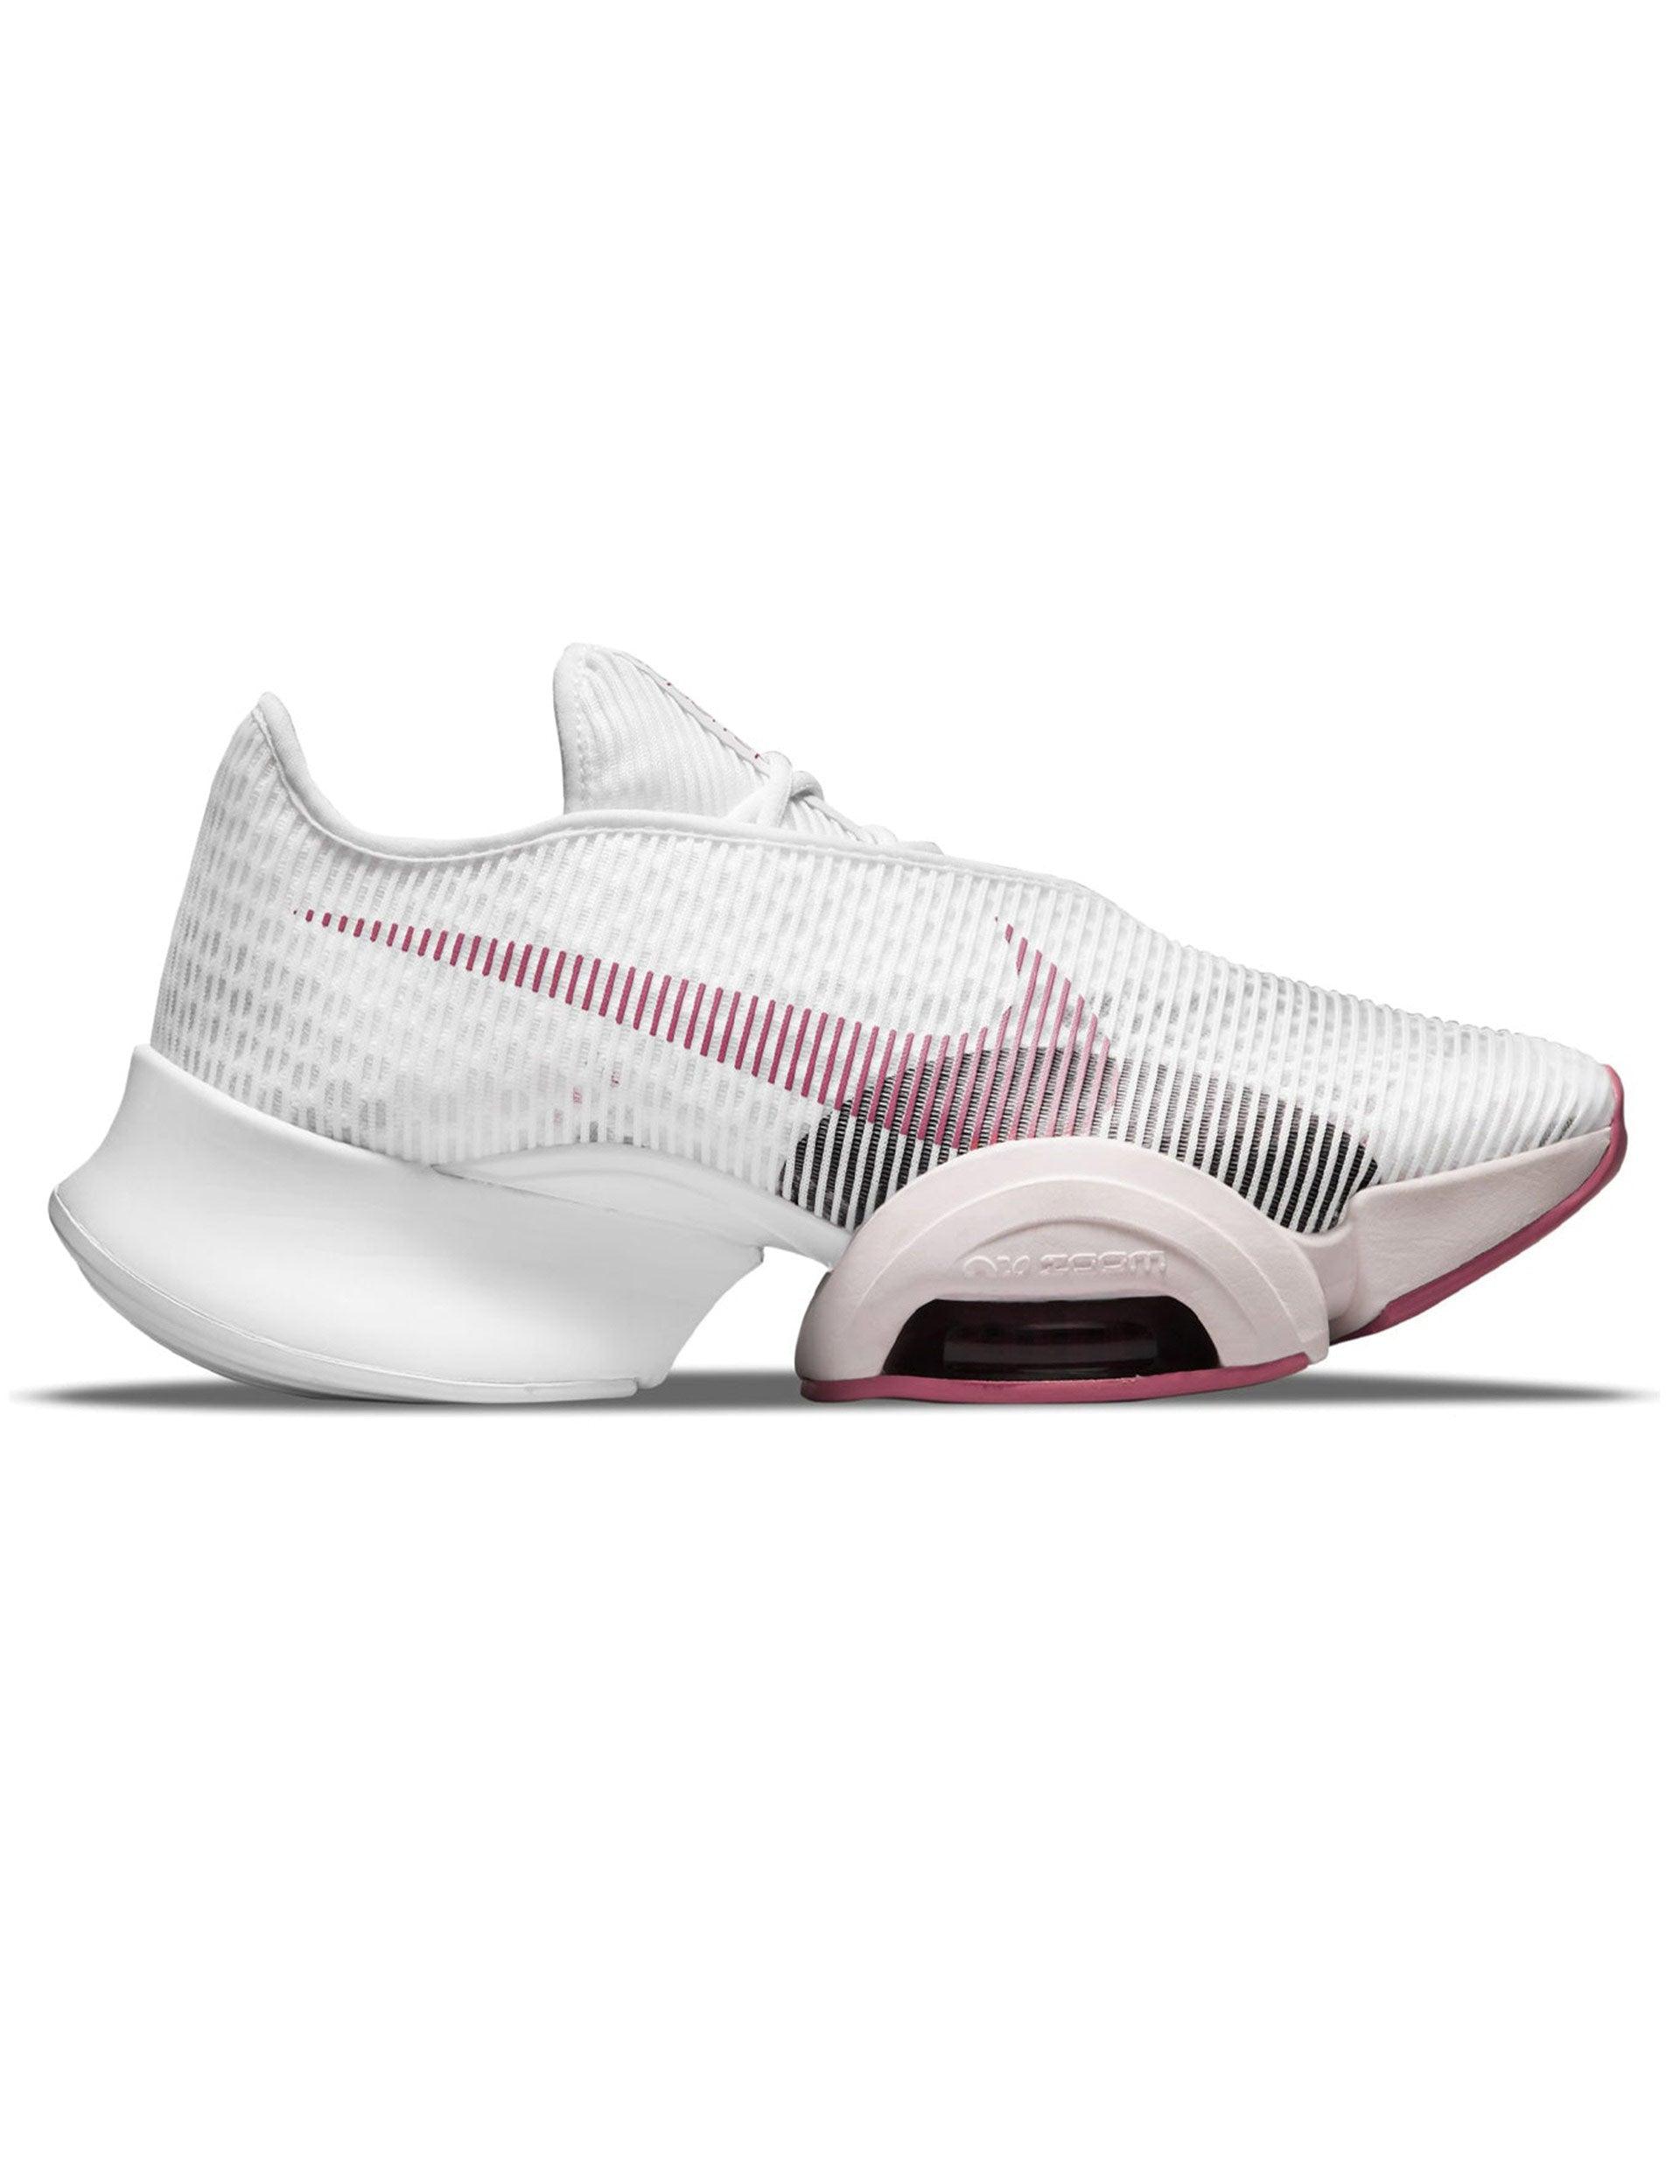 counter smart Conqueror Nike Air Zoom Superrep 2 Shoes in White | Lyst